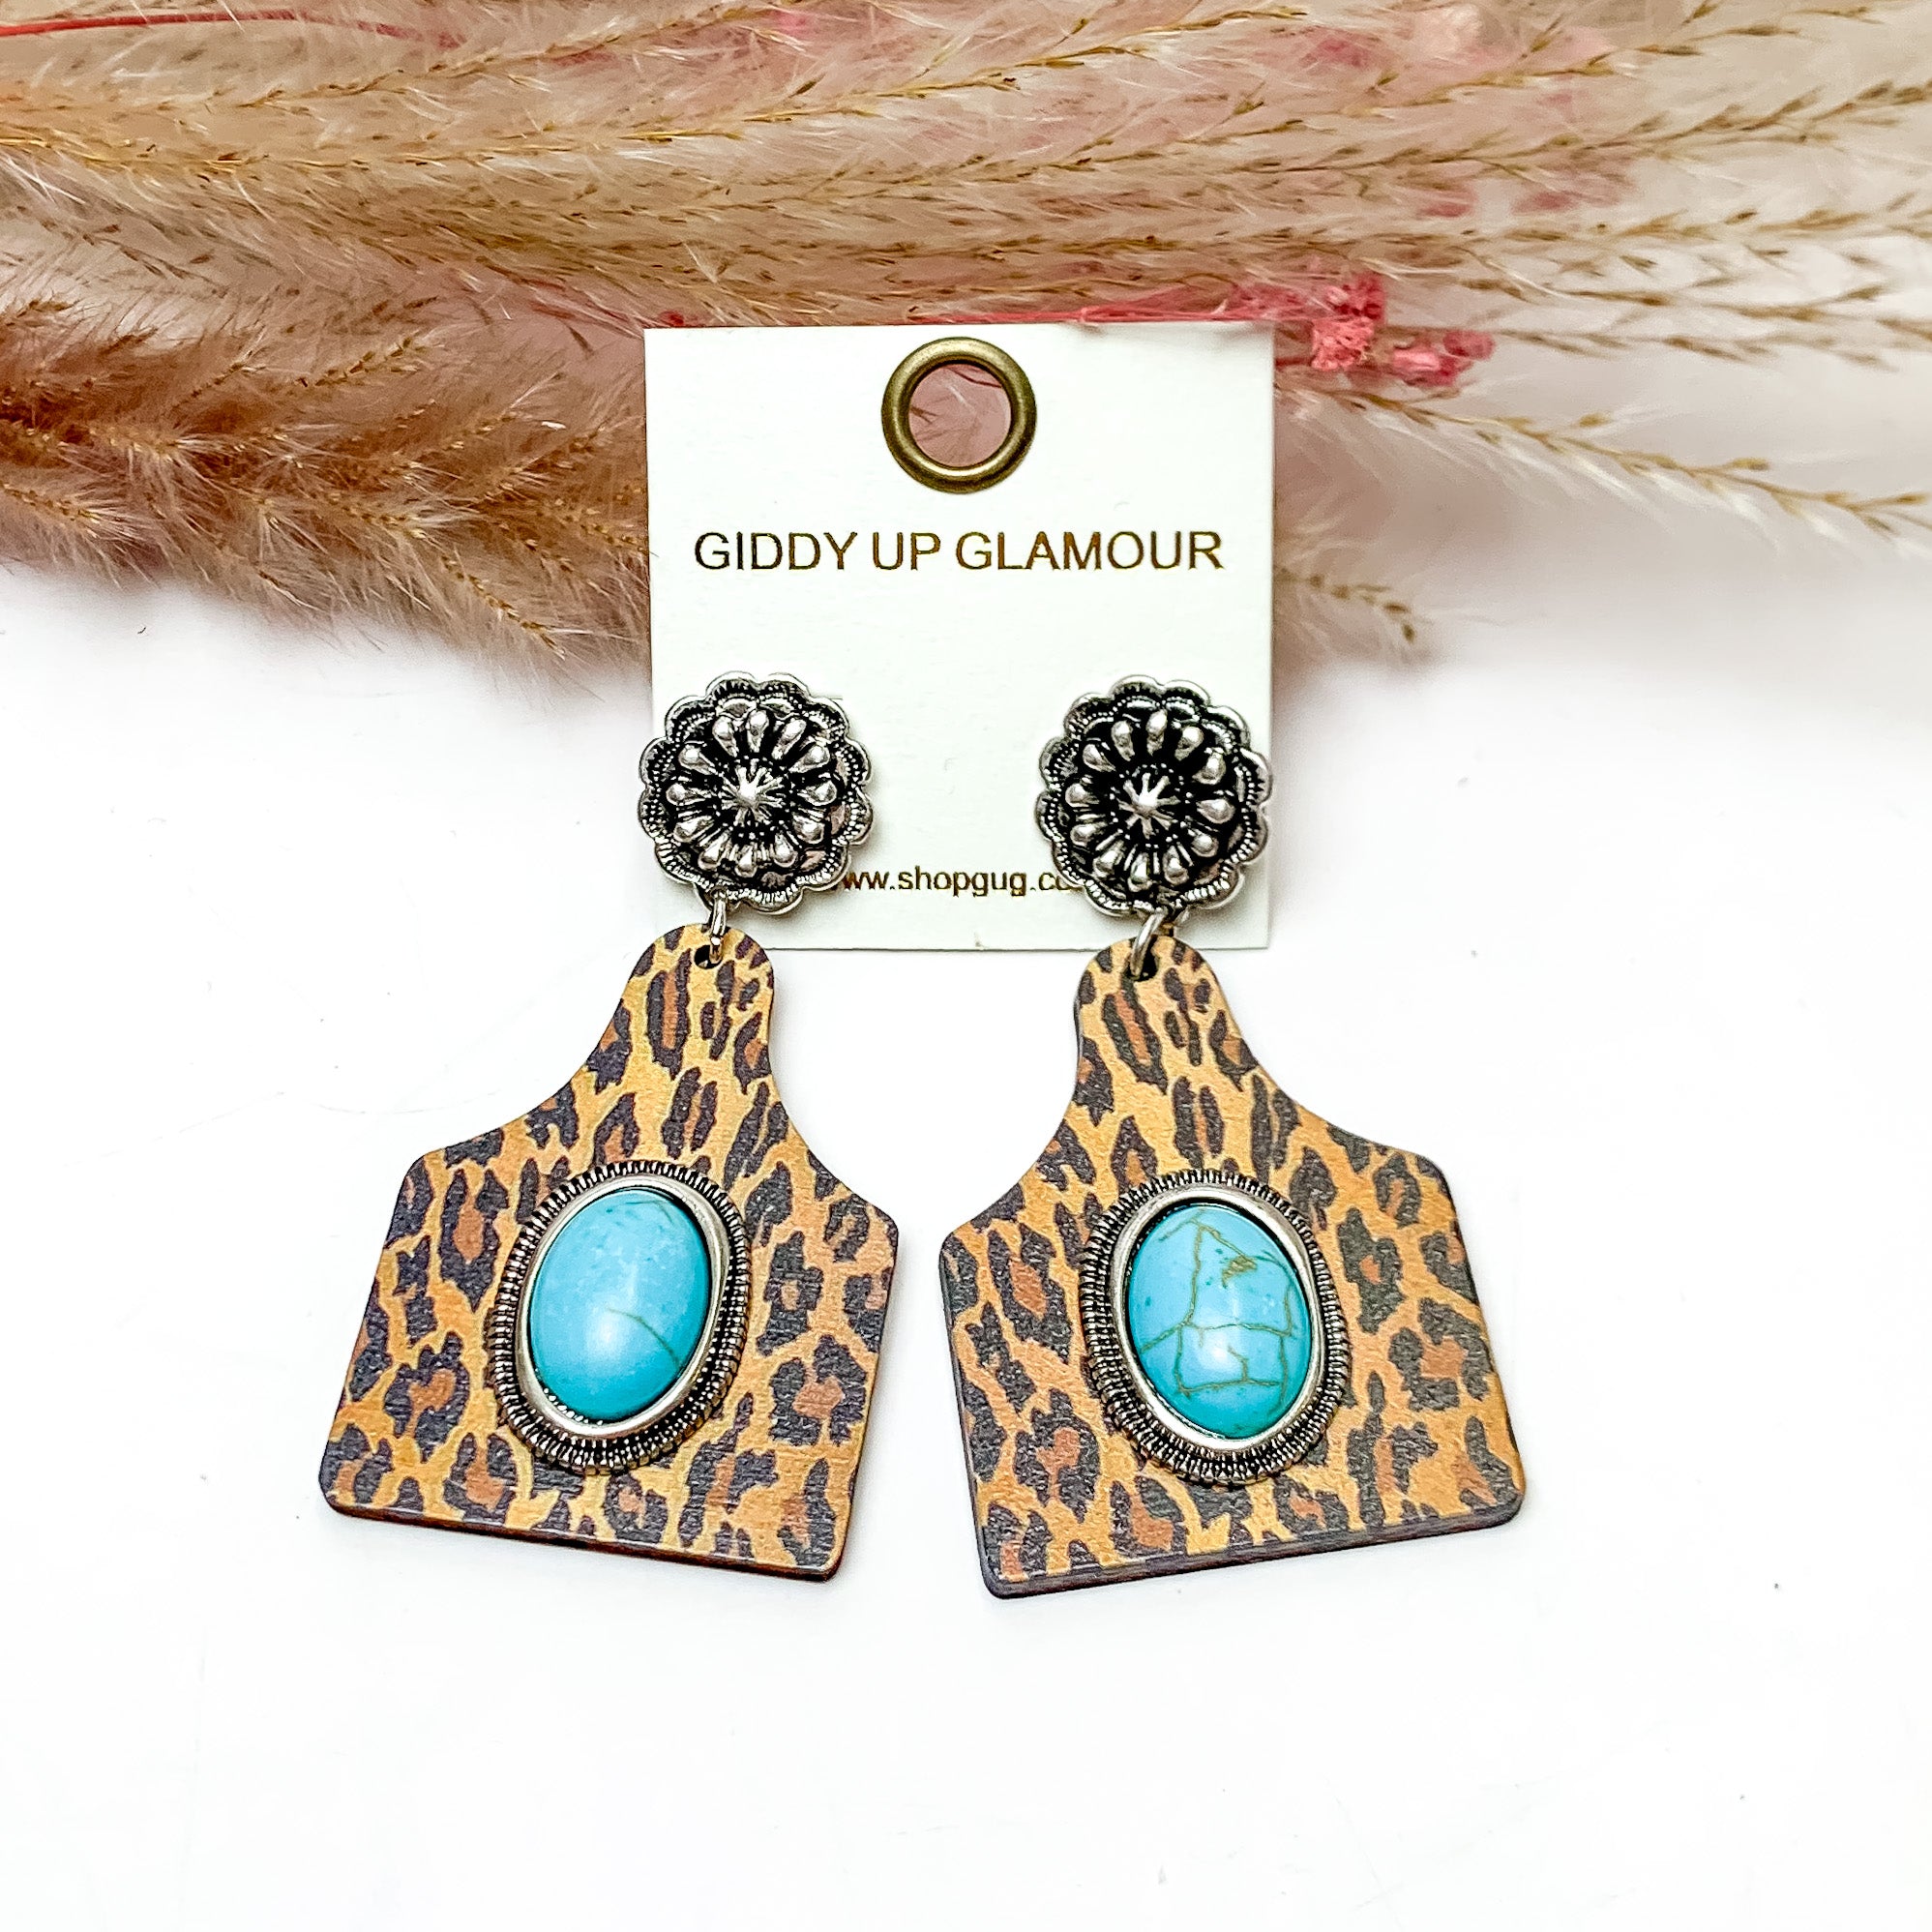 Leopard Cattle Tag Earrings With Turquoise Center Stone. These earrings are pictured on a white background with flowers behind for decoration.